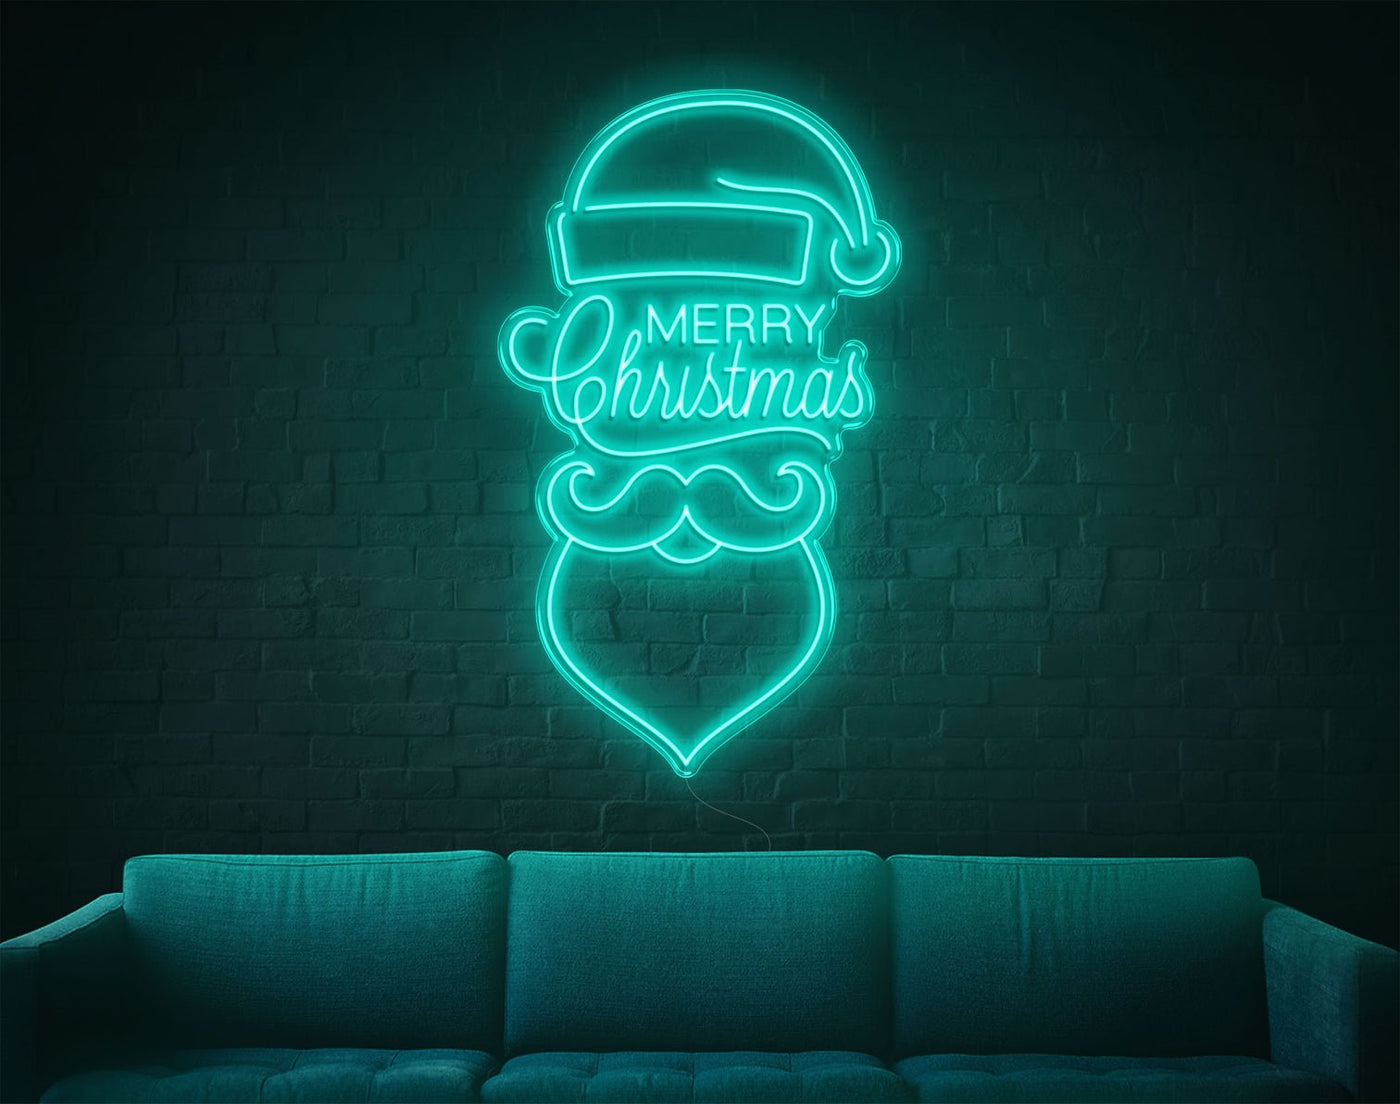 Merry Christmas V3 LED Neon Sign - 50inch x 30inchTurquoise